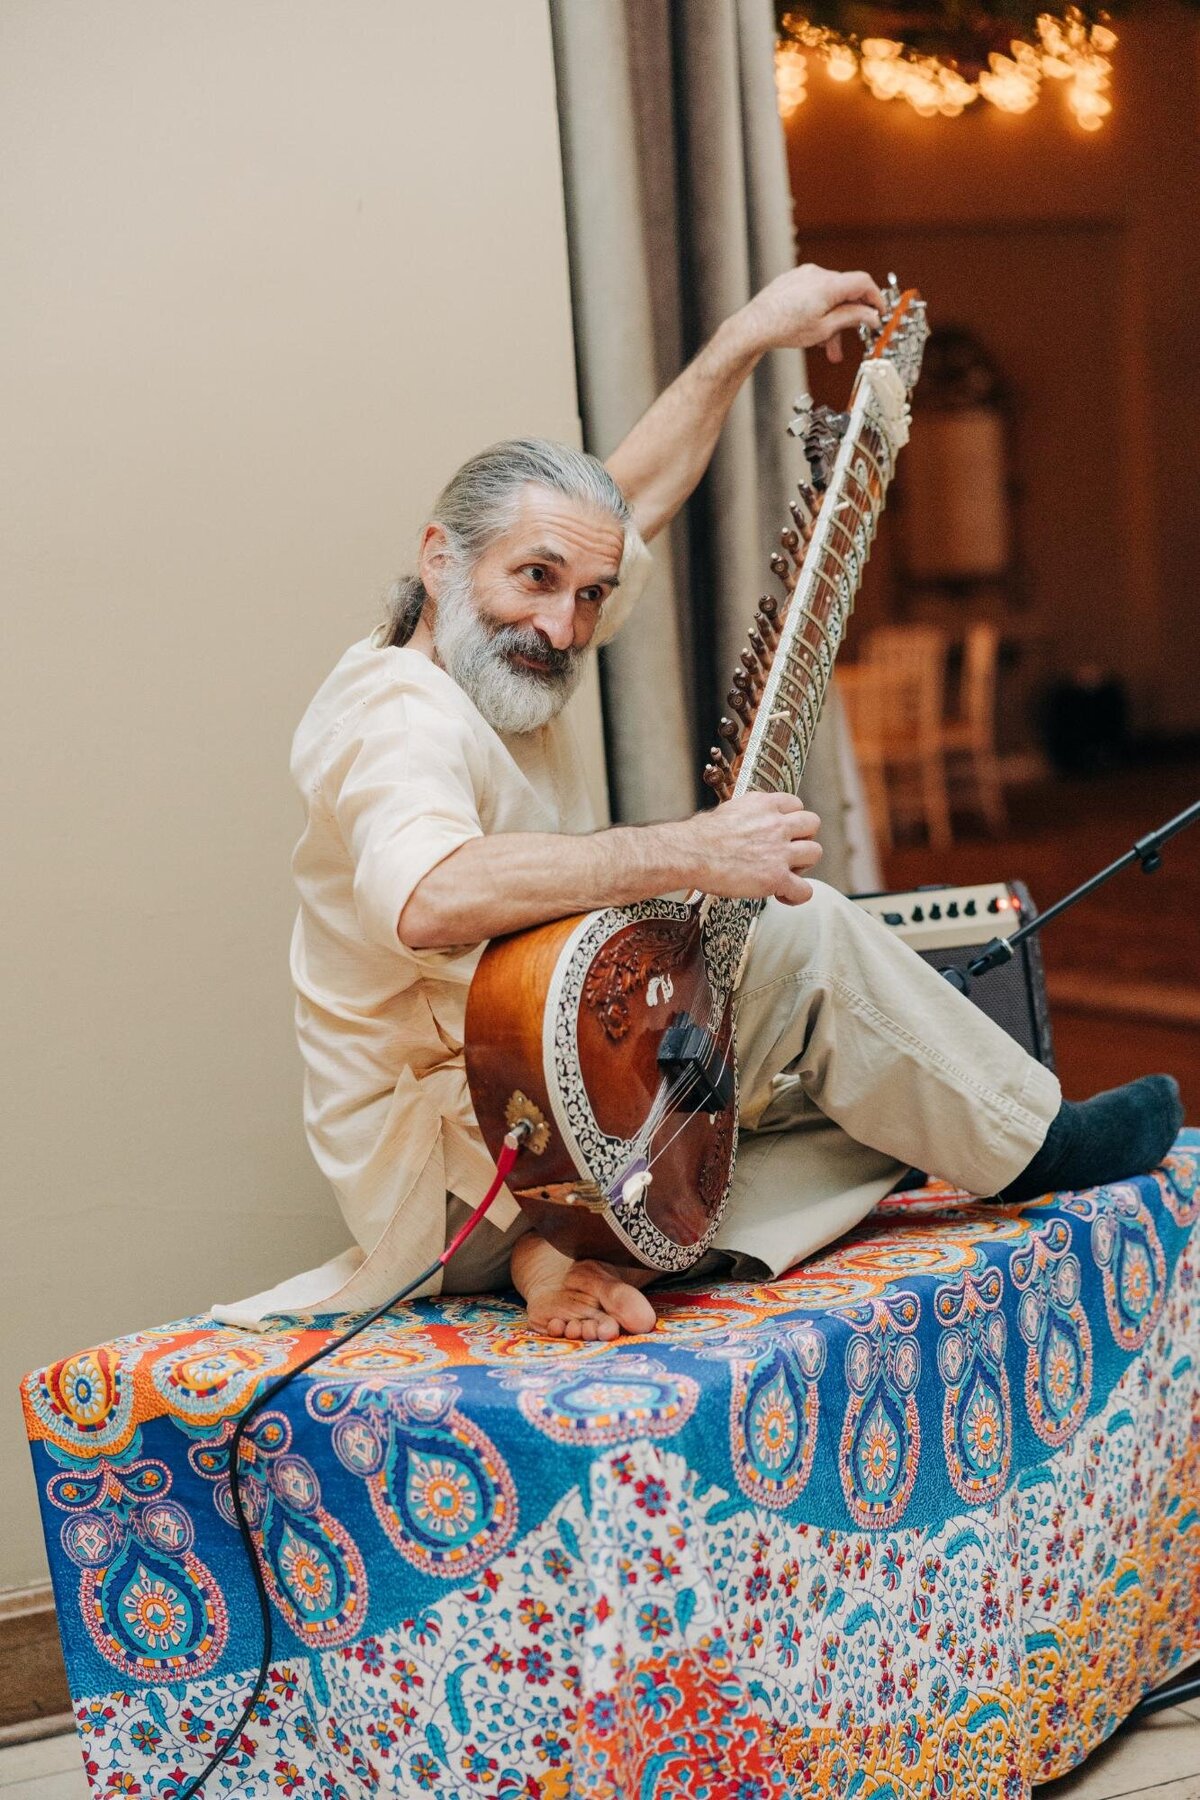 An elderly man with a long beard tuning a sitar while sitting on a colorful patterned cloth-draped platform.